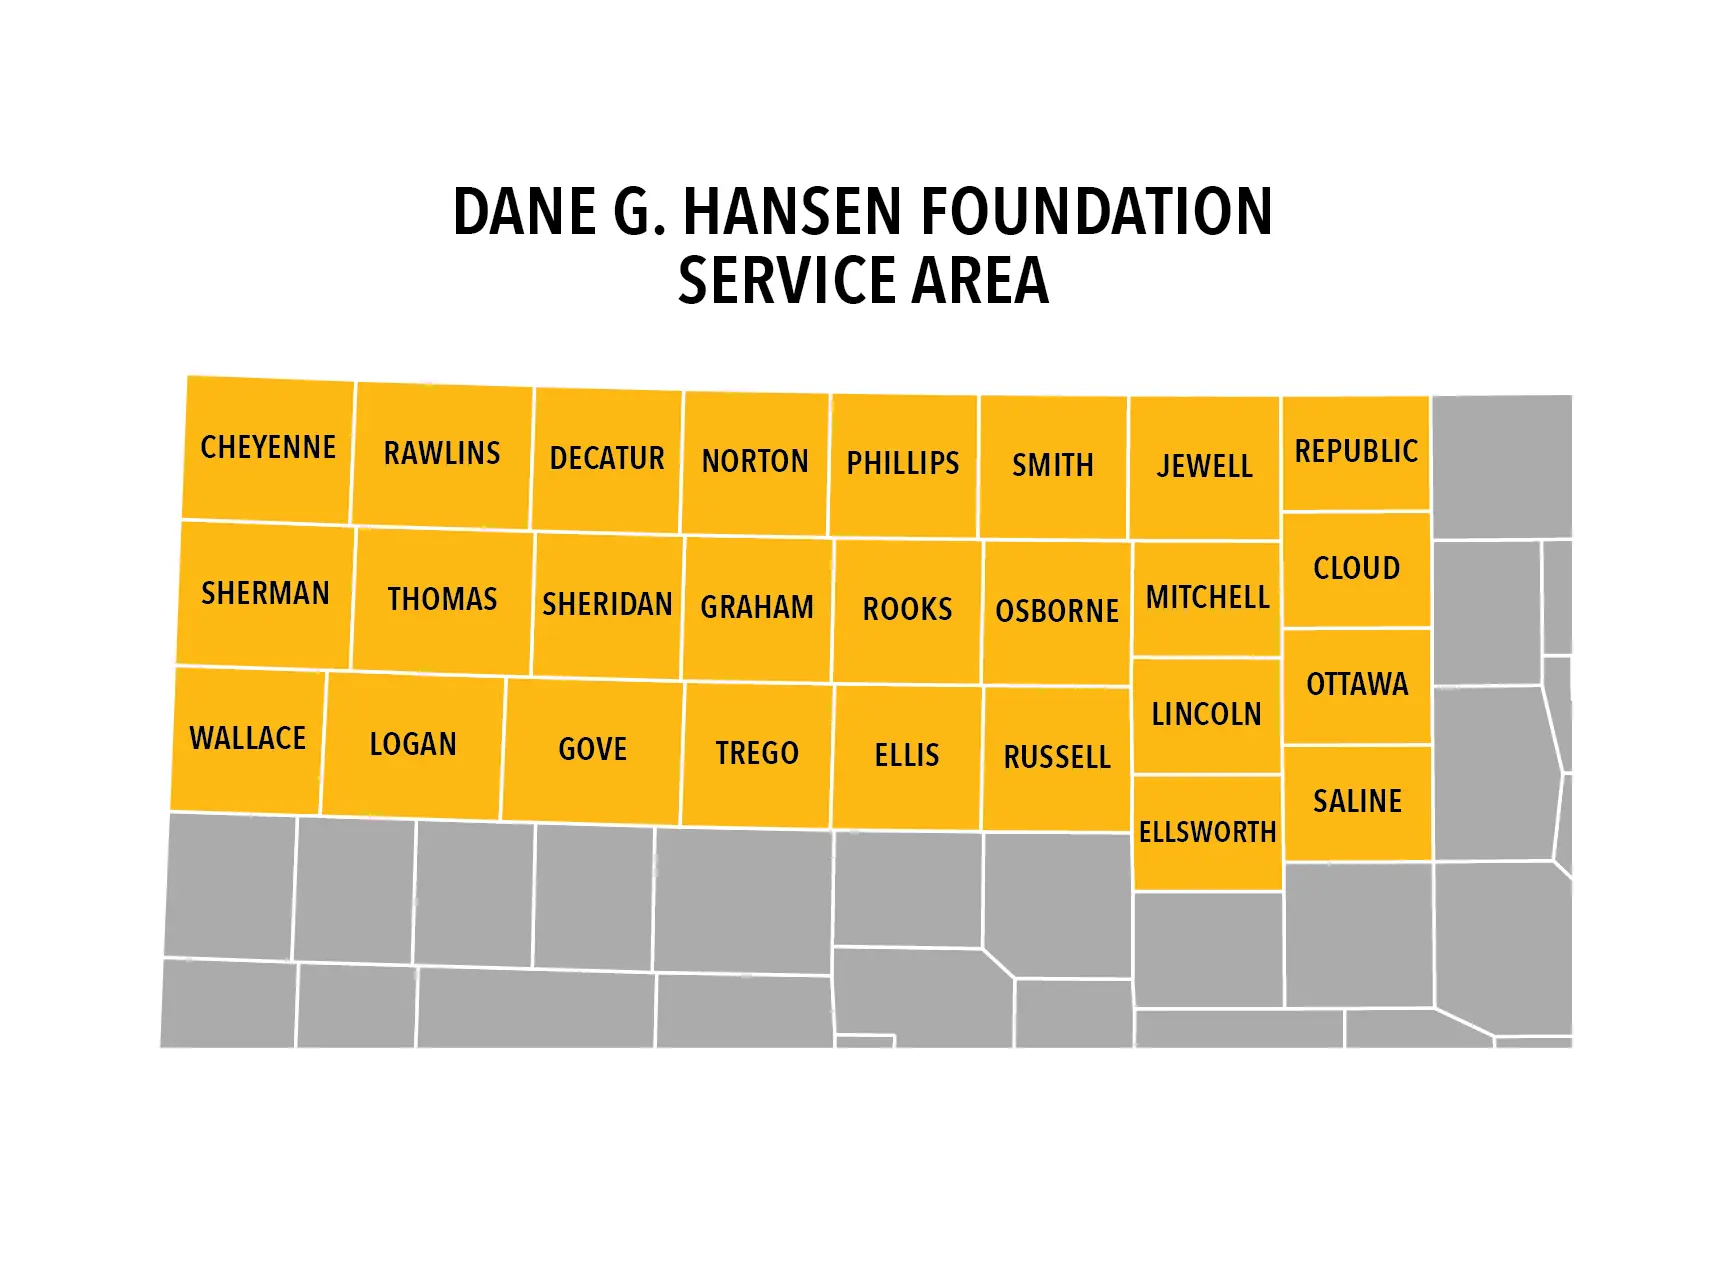 Employers must come from the Dane G. Hansen Foundation service area. Student applicants are not geographically restricted.